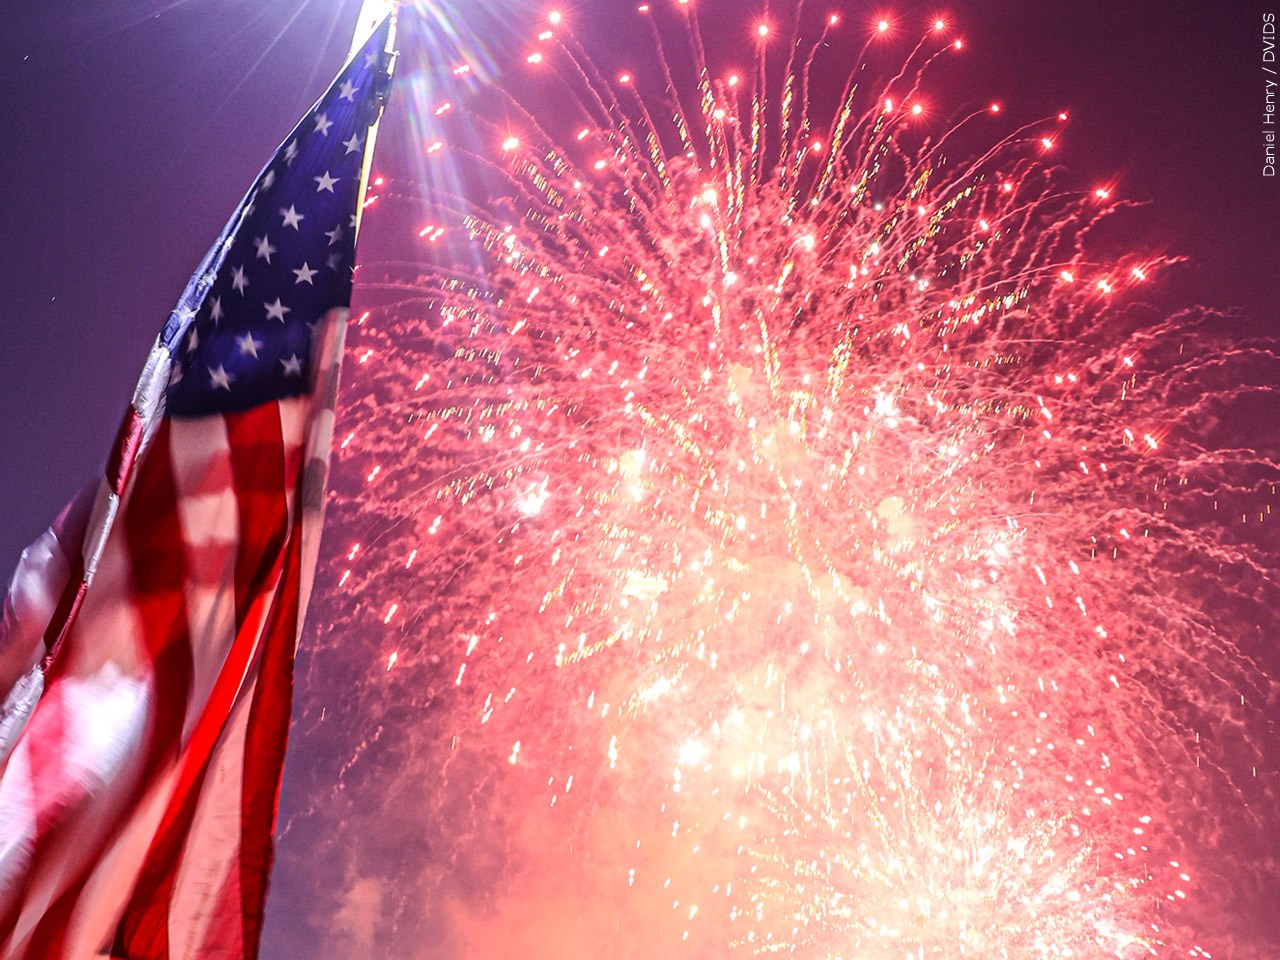 Forth of july, 4th, 4th of july, explosion, fireworks, flag, usa